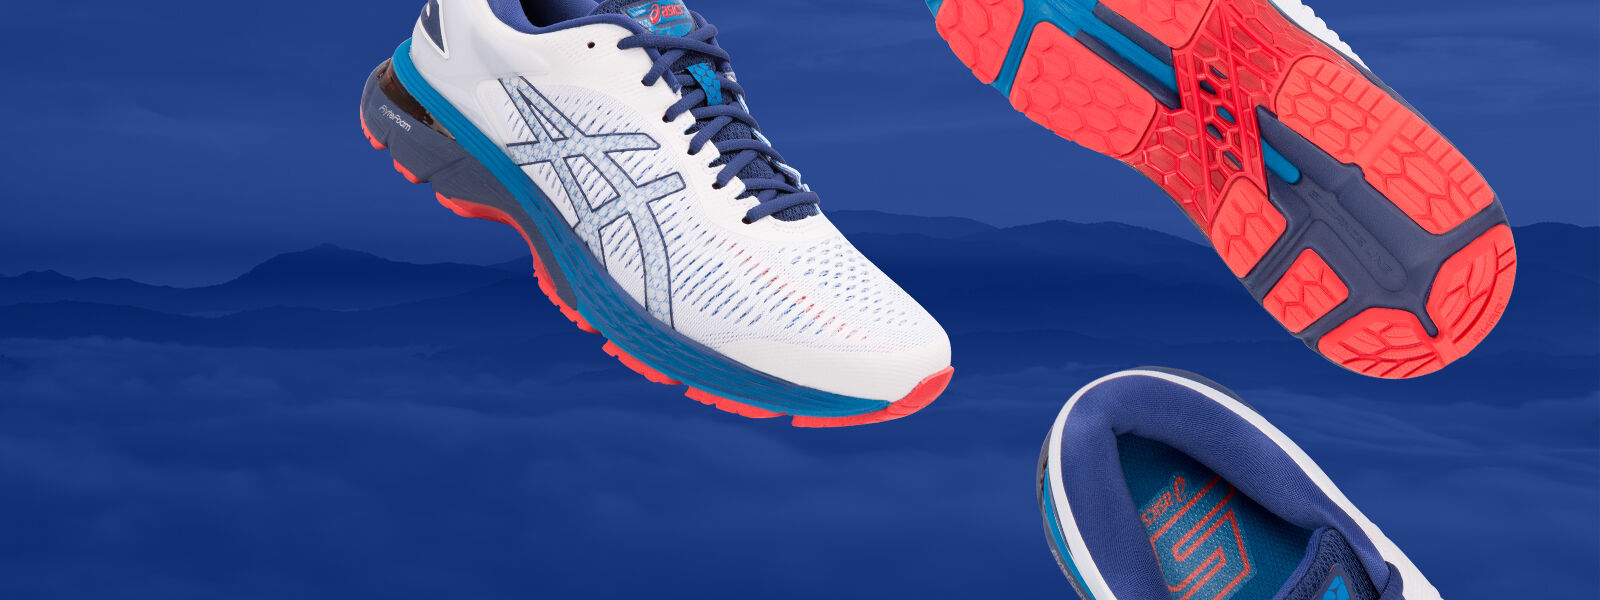 promo code asics outlet